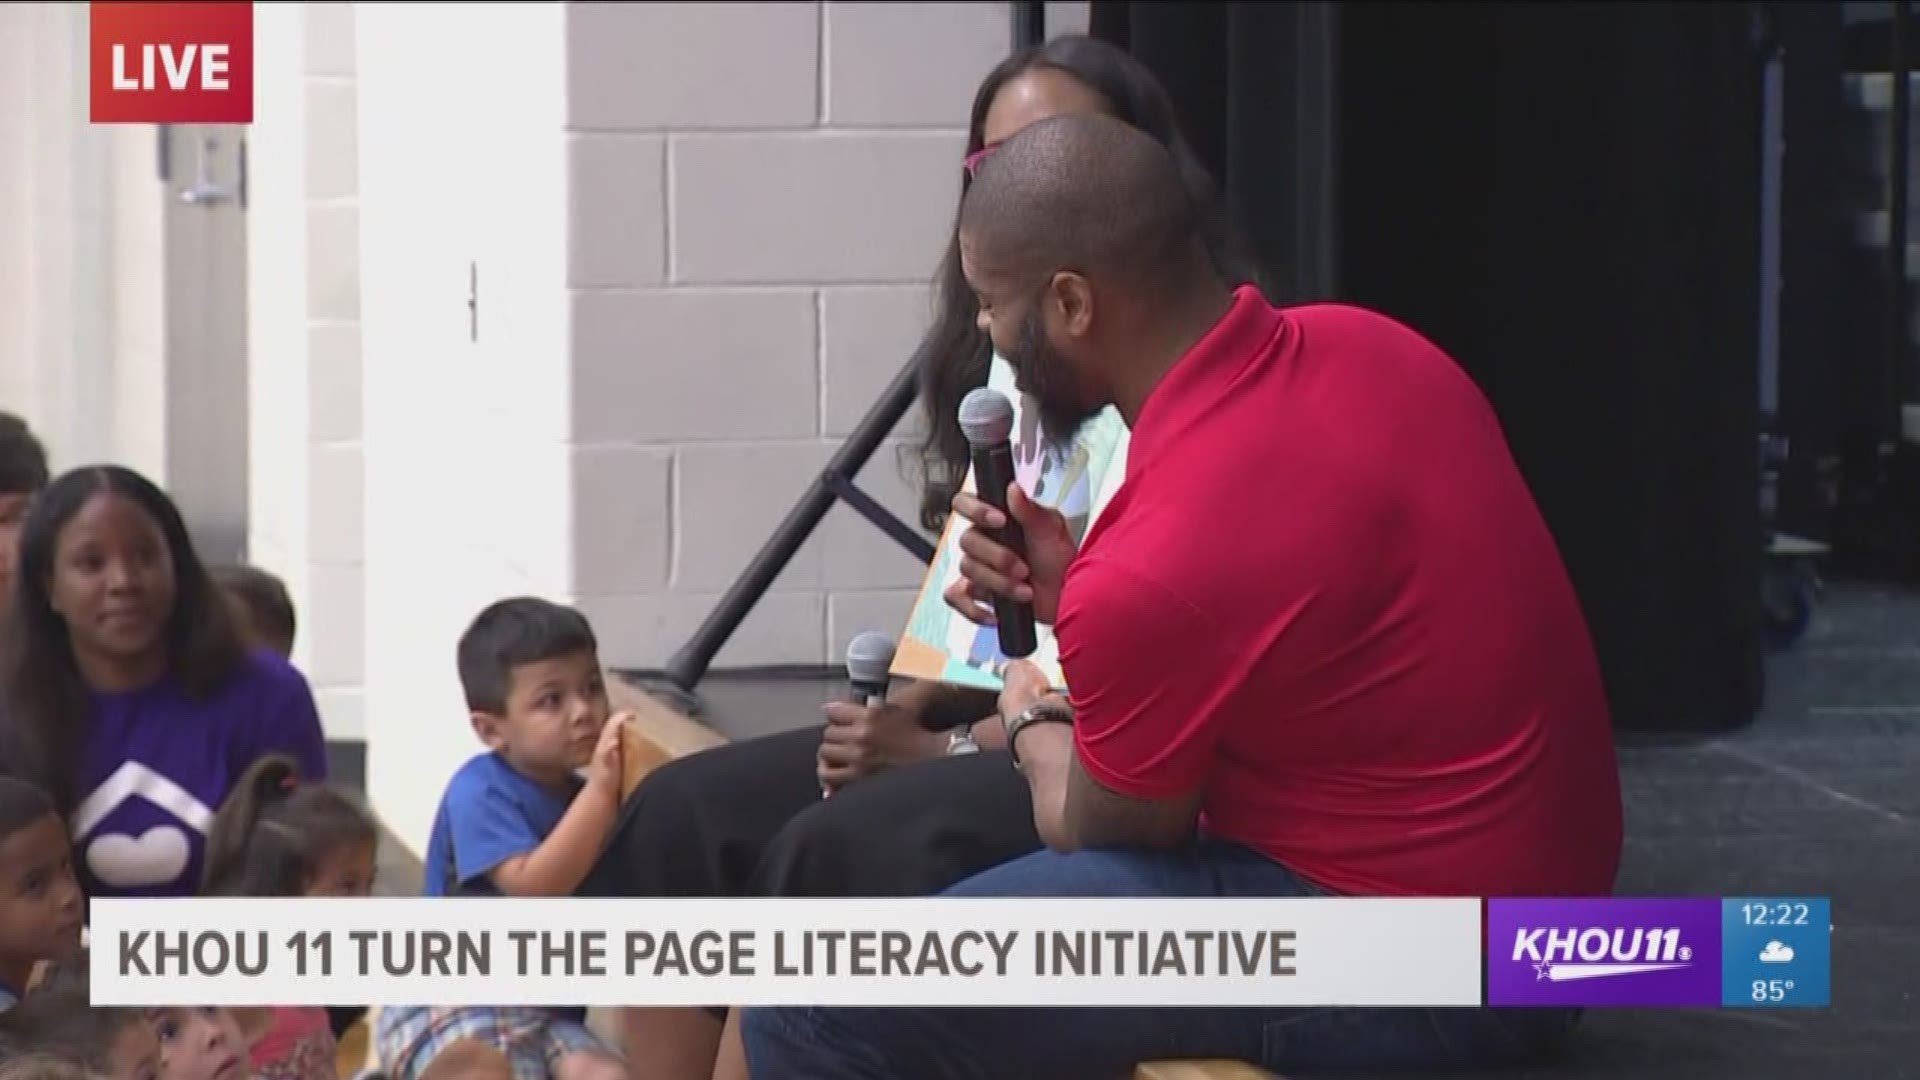 The KHOU 11 Turn The Page Literacy Initiative is in full effect! We have partnered with Houston based non-profit Books Between Kids for the third year in a row in efforts to end illiteracy in Houston and surrounding areas.